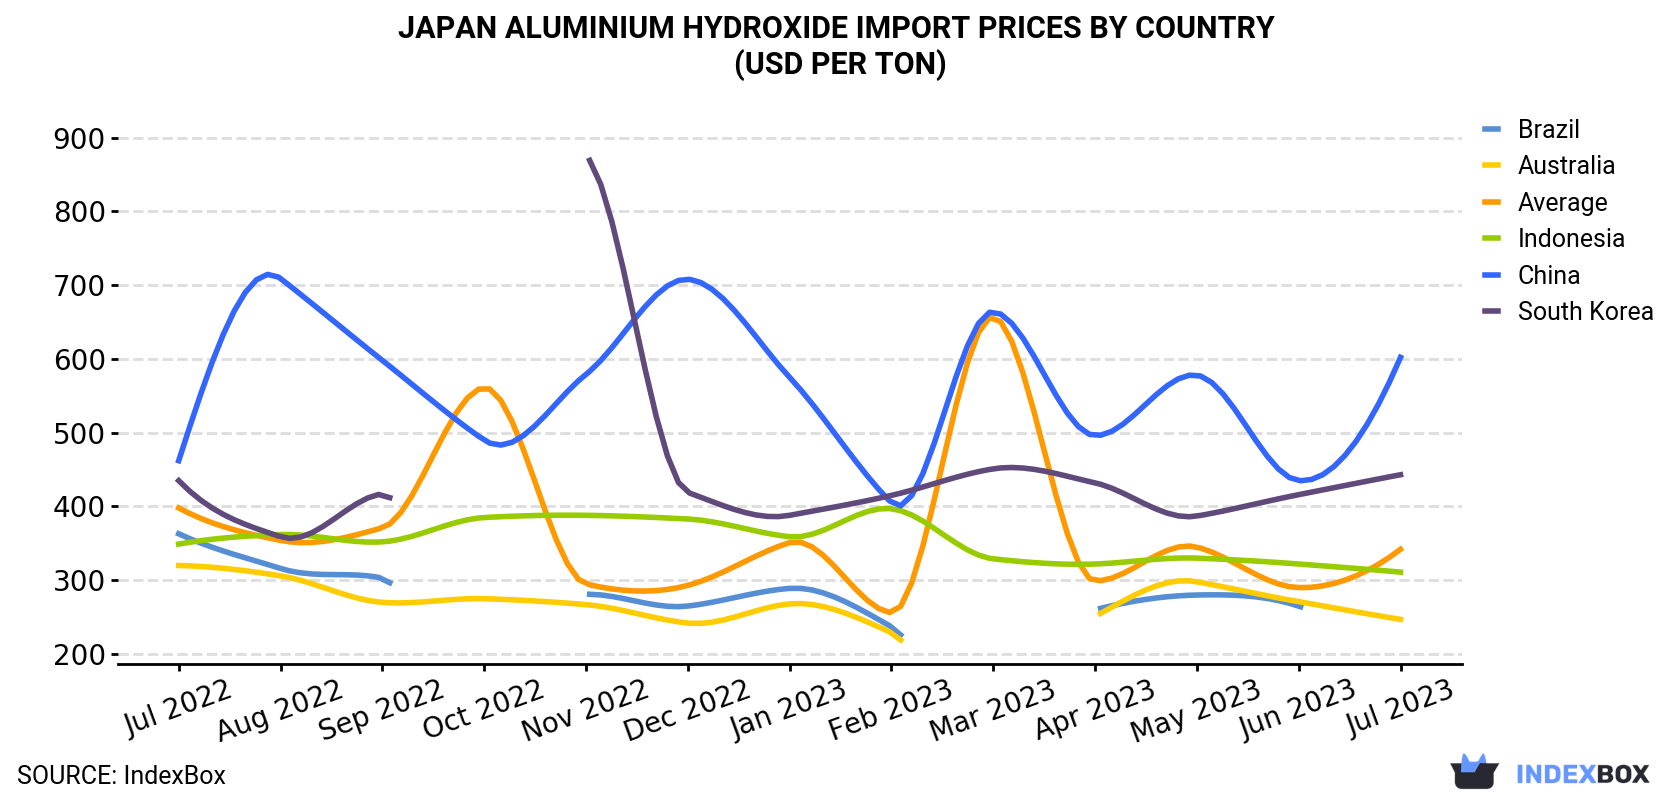 Japan Aluminium Hydroxide Import Prices By Country (USD Per Ton)